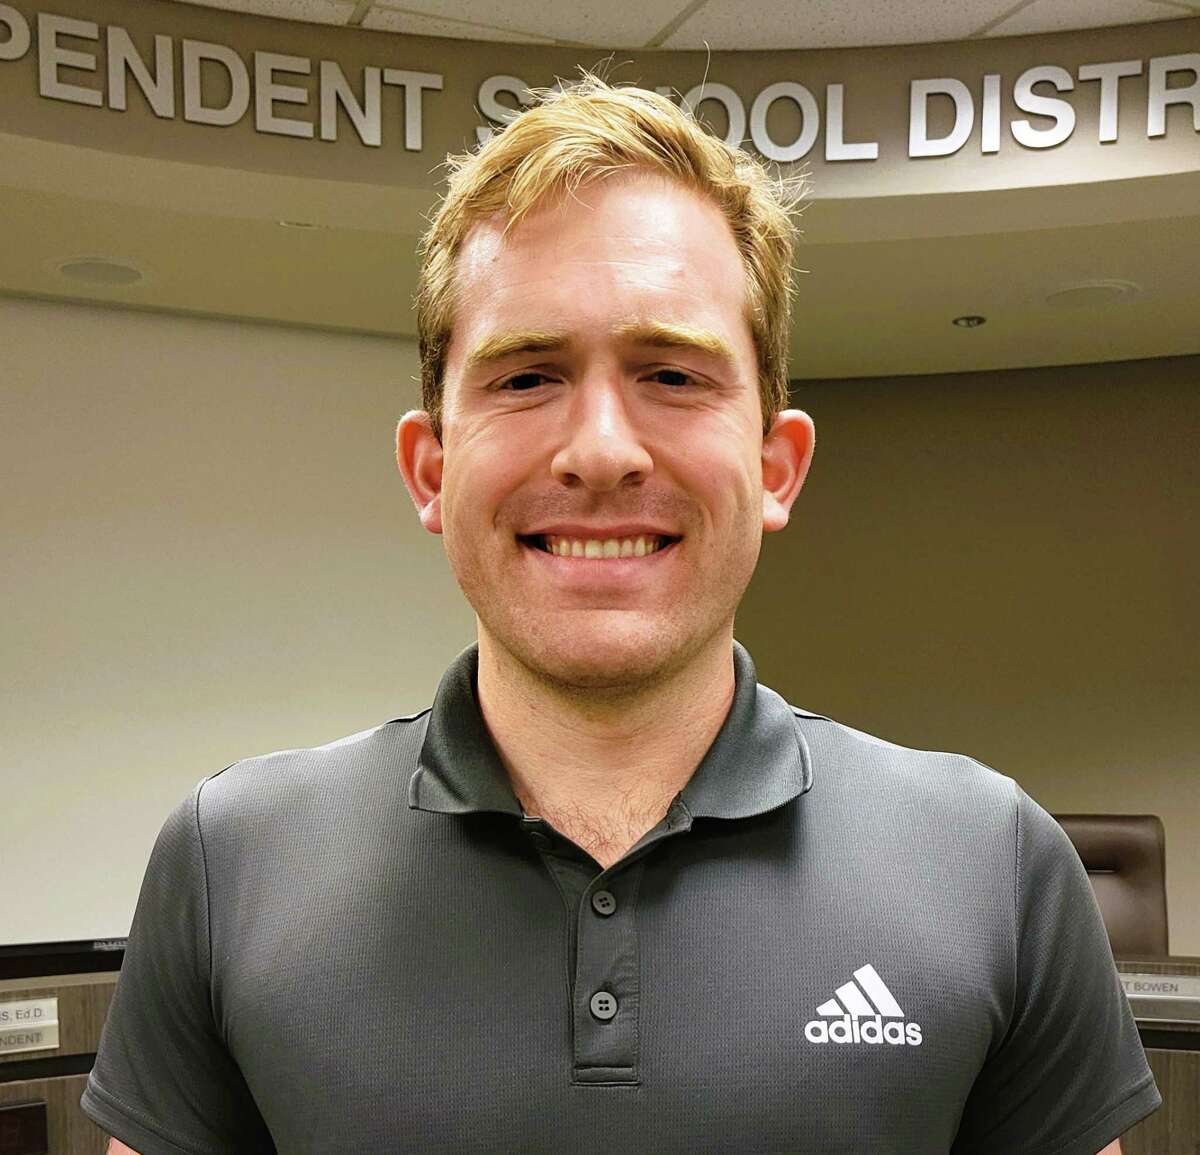 After a decision on the outcome of two races for Clear Creek ISD trustee seats in the May 7 election was delayed for 10 days while officials verified the large number of absentee votes, re-elected At-Large Position B trustee Scott Bowen asked why election officials did not start checking absentee ballots until Election Day.